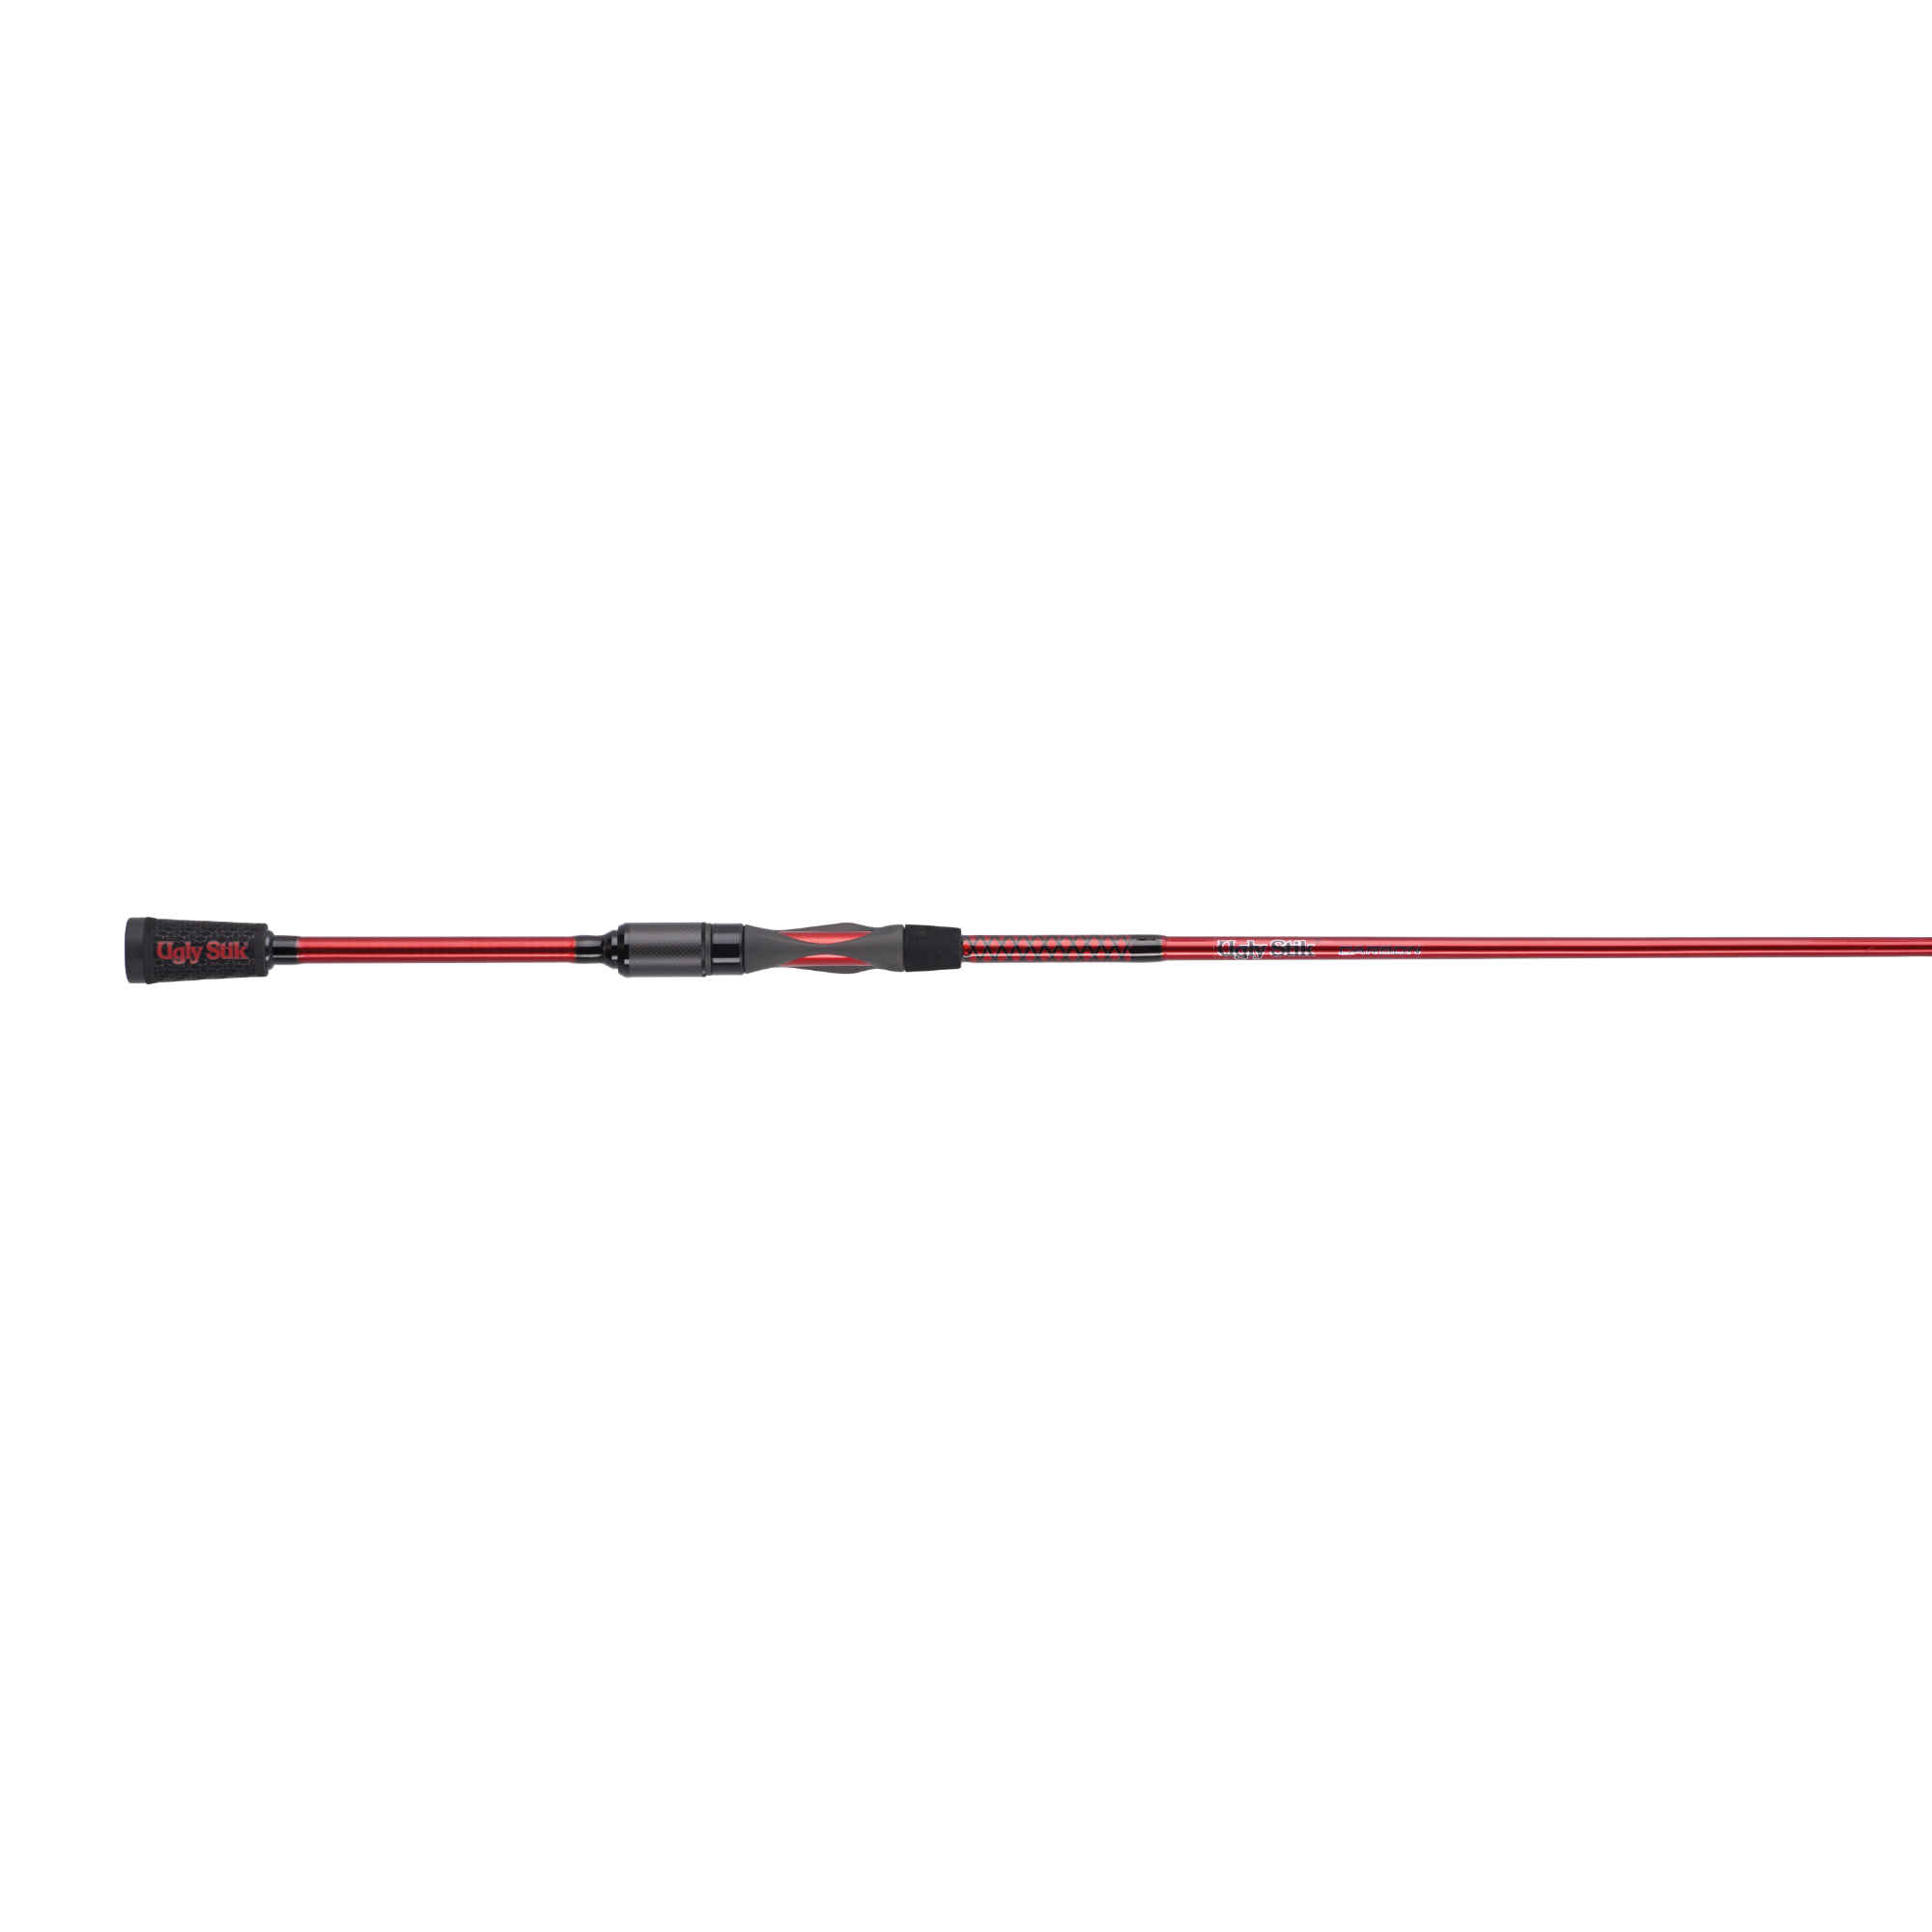 Ugly Stik Carbon Spinning Rod, 1 Piece, Medium, Fast, 8 Guides, 3/16-5/8oz  Lures USCBSP701M with Free S&H — CampSaver